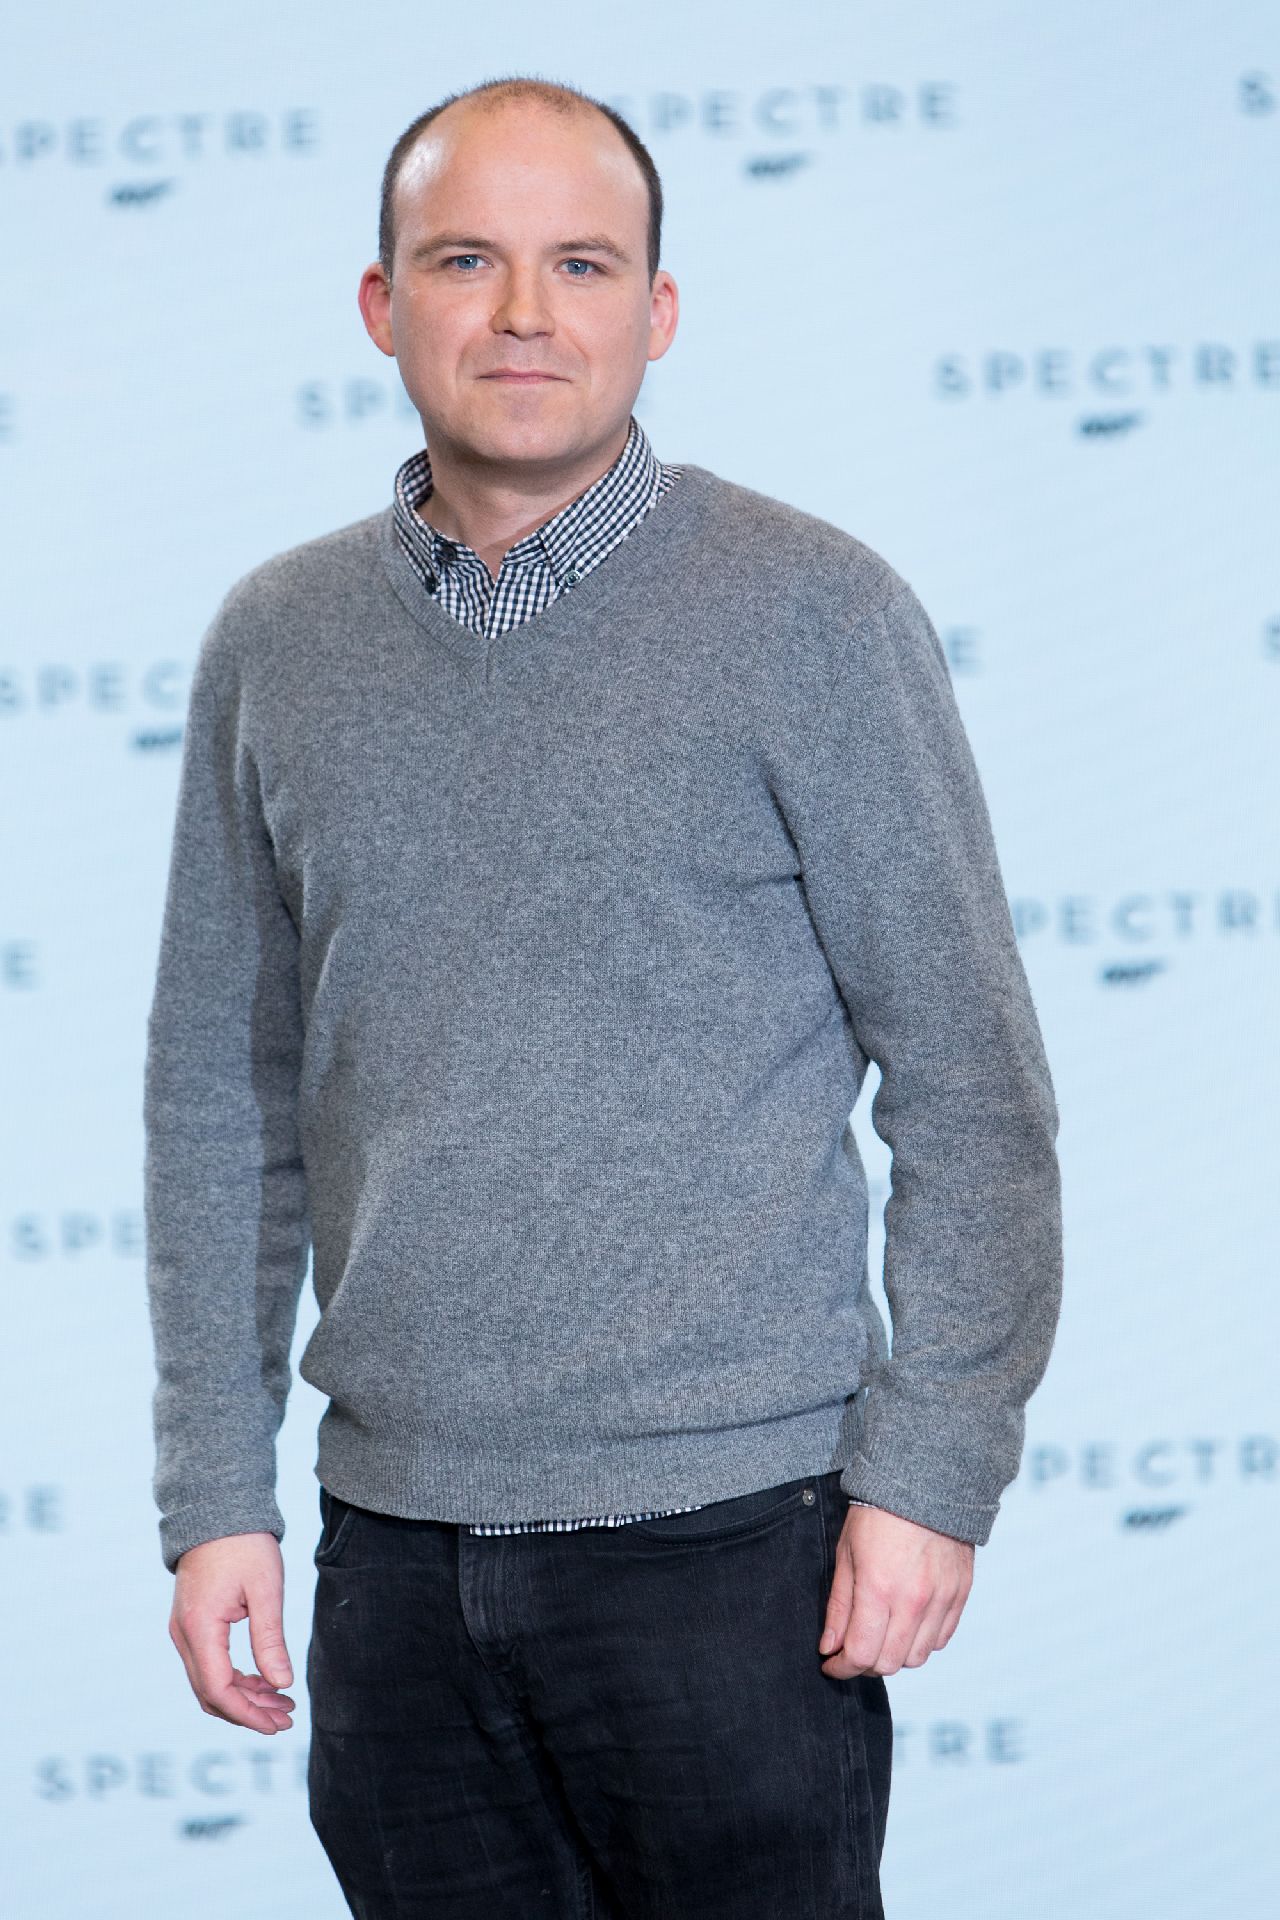 Eon Productions, Metro-Goldwyn-Mayer and Sony Pictures Entertainment announce the 24th James Bond adventure " SPECTRE. " Pictured: (L to R) Rory Kinnear.